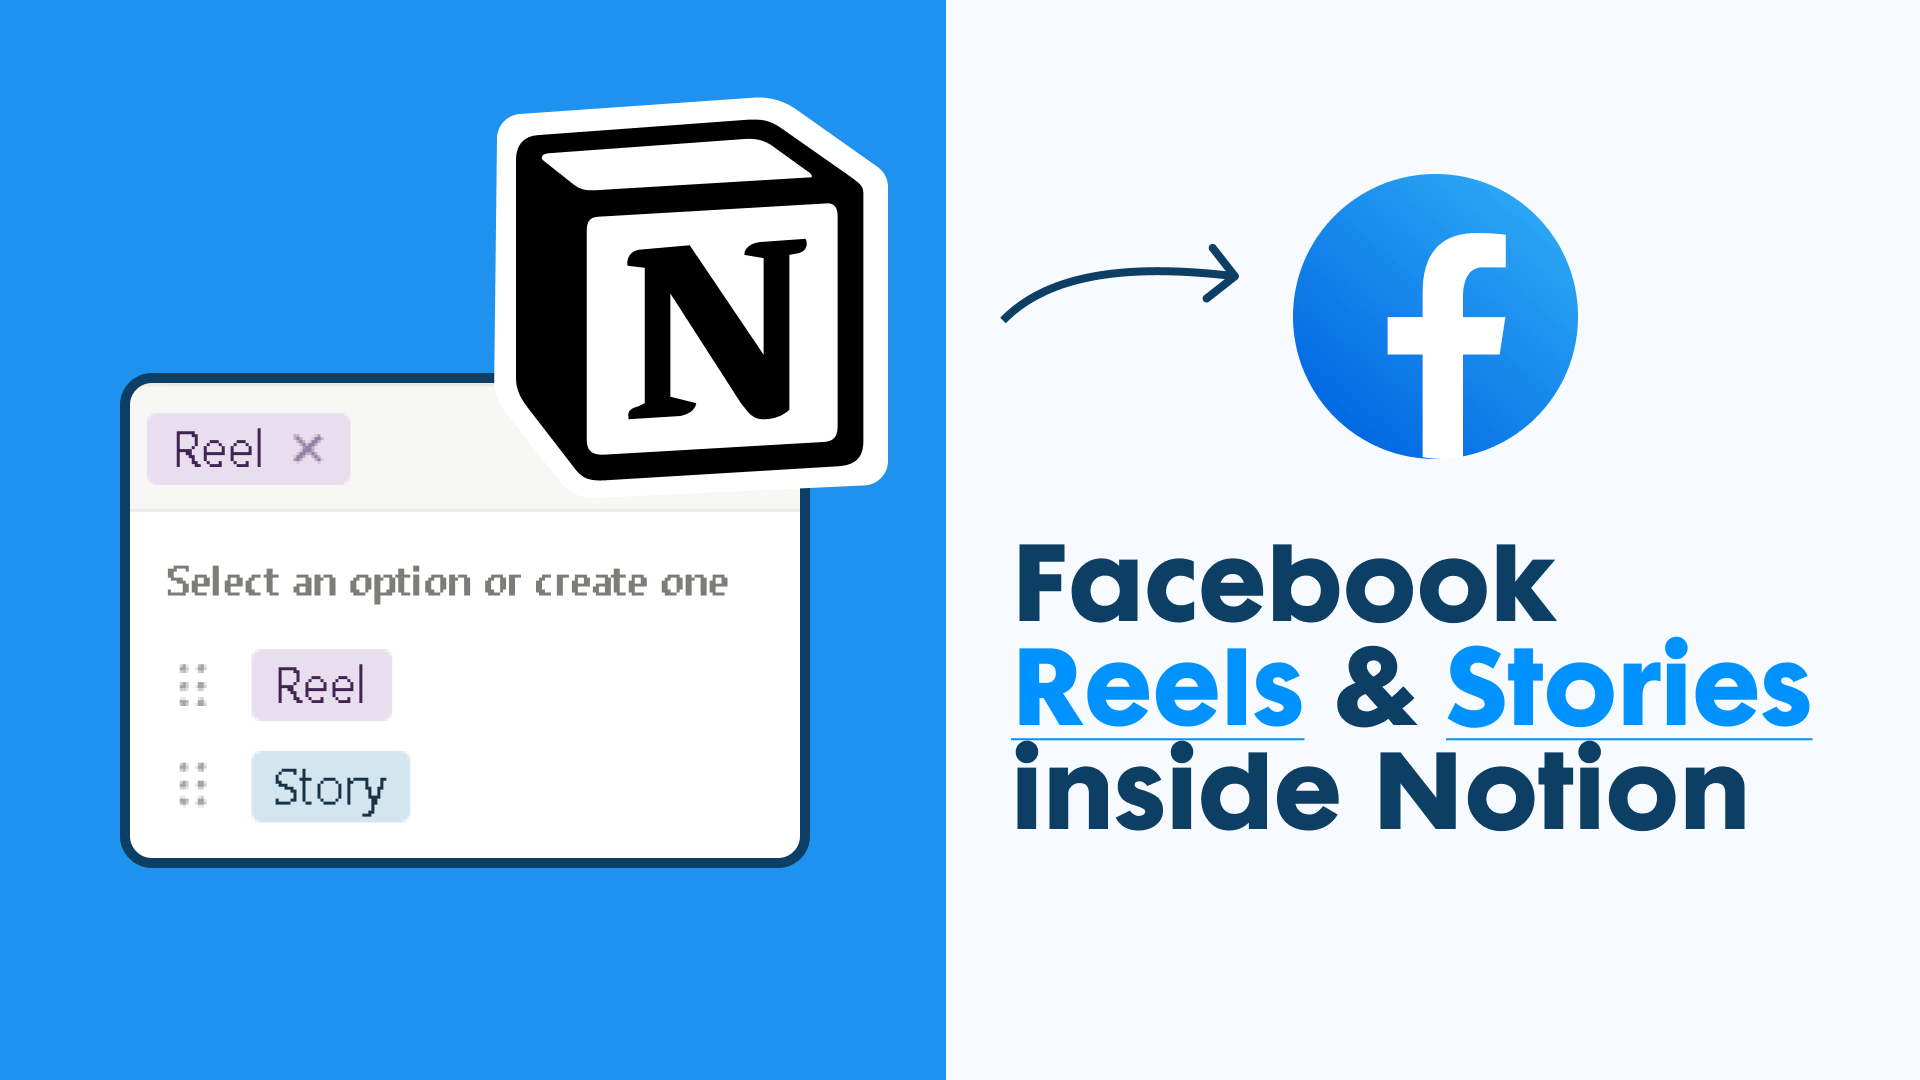 How to post Reels & Stories on Facebook using Notion?